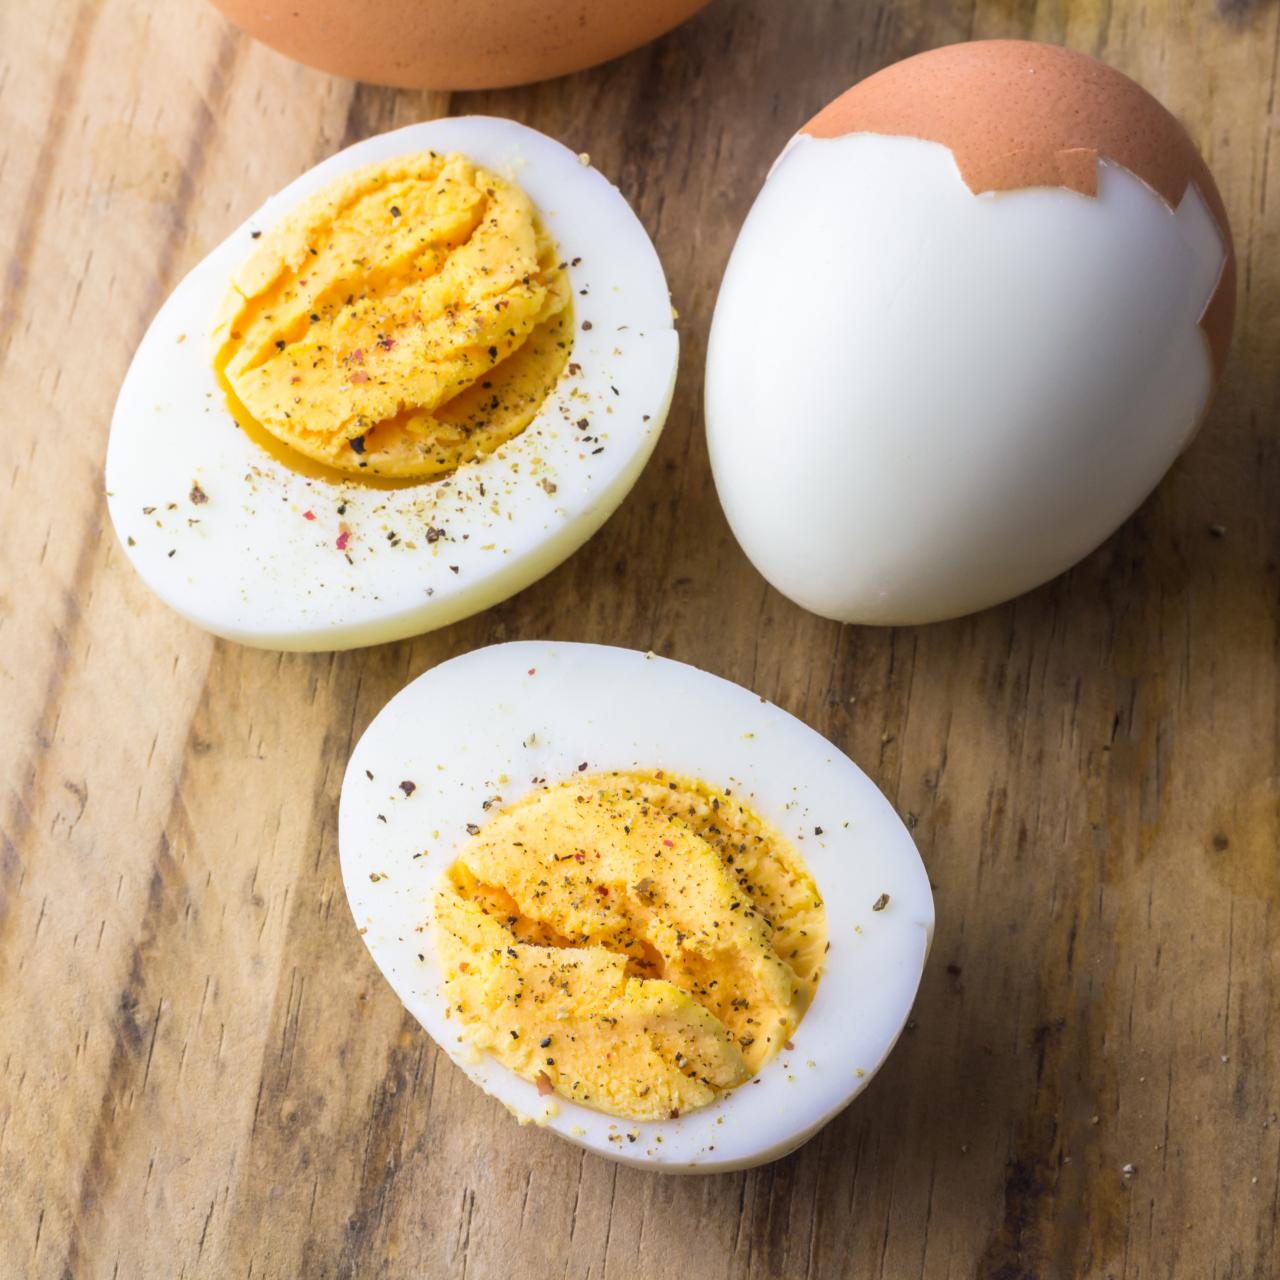 How to Peel Hard Boiled Eggs - FeelGoodFoodie